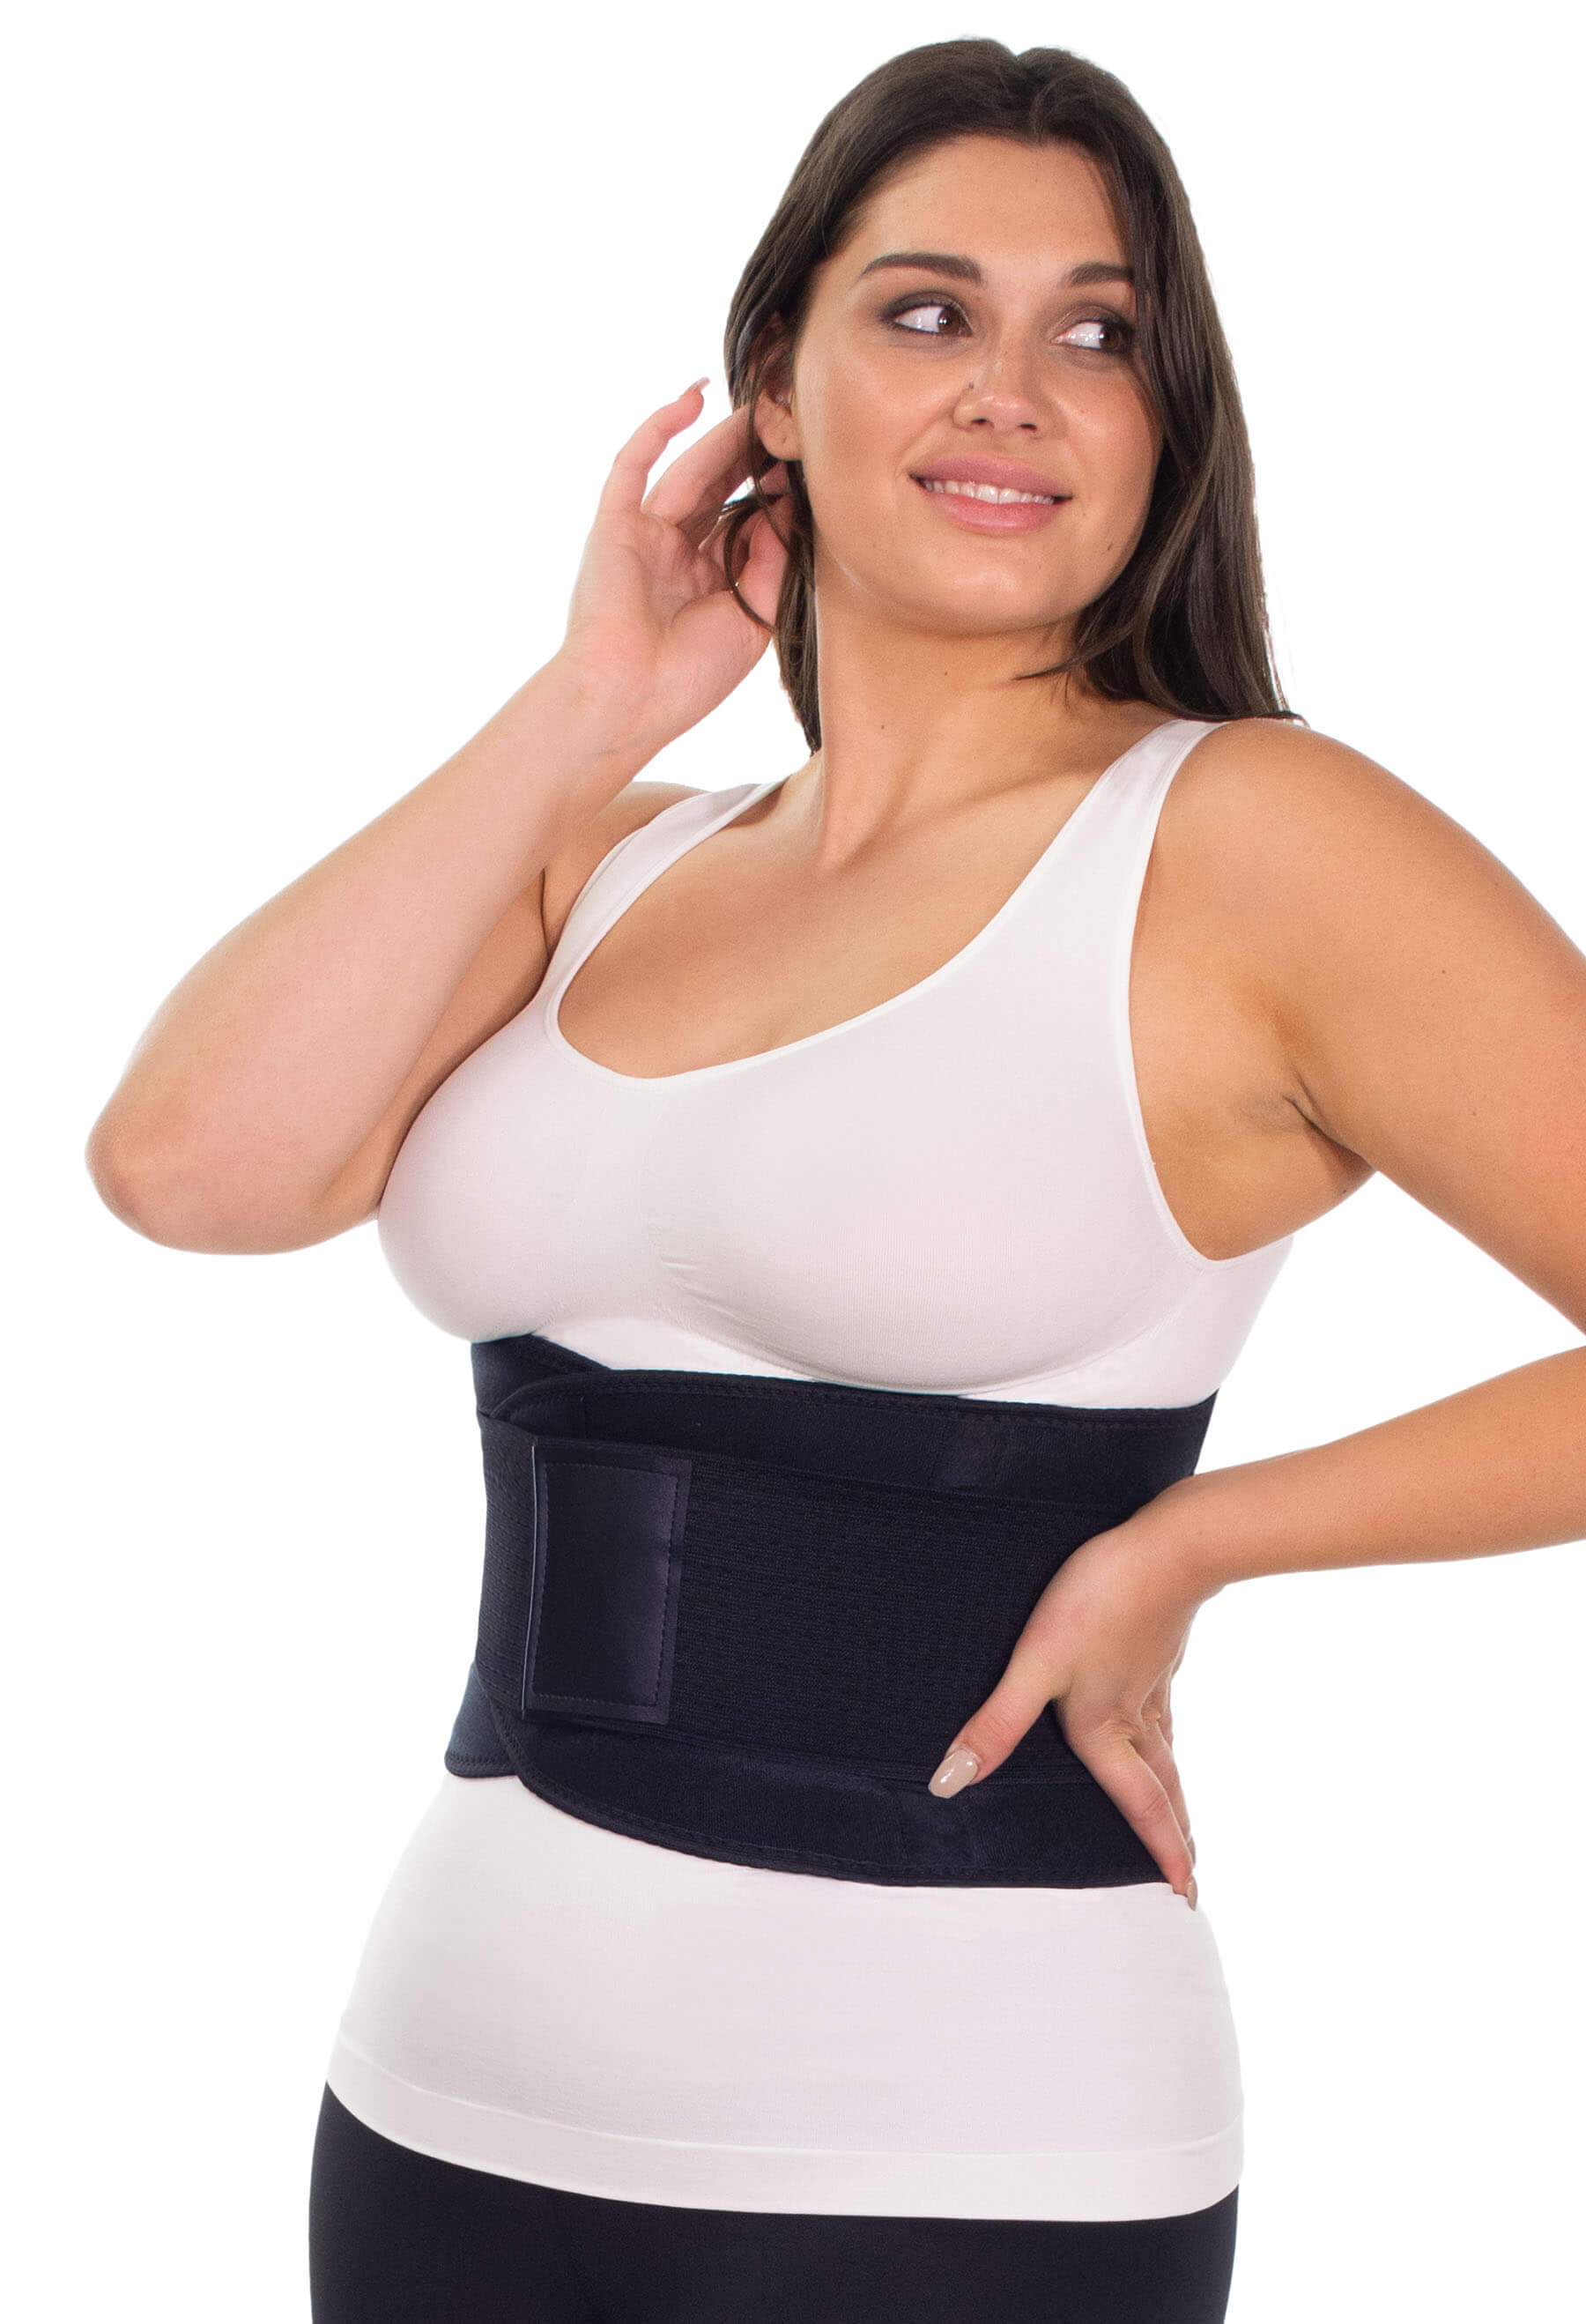 Can anyone recommend a good plus size waist trainer, I usually